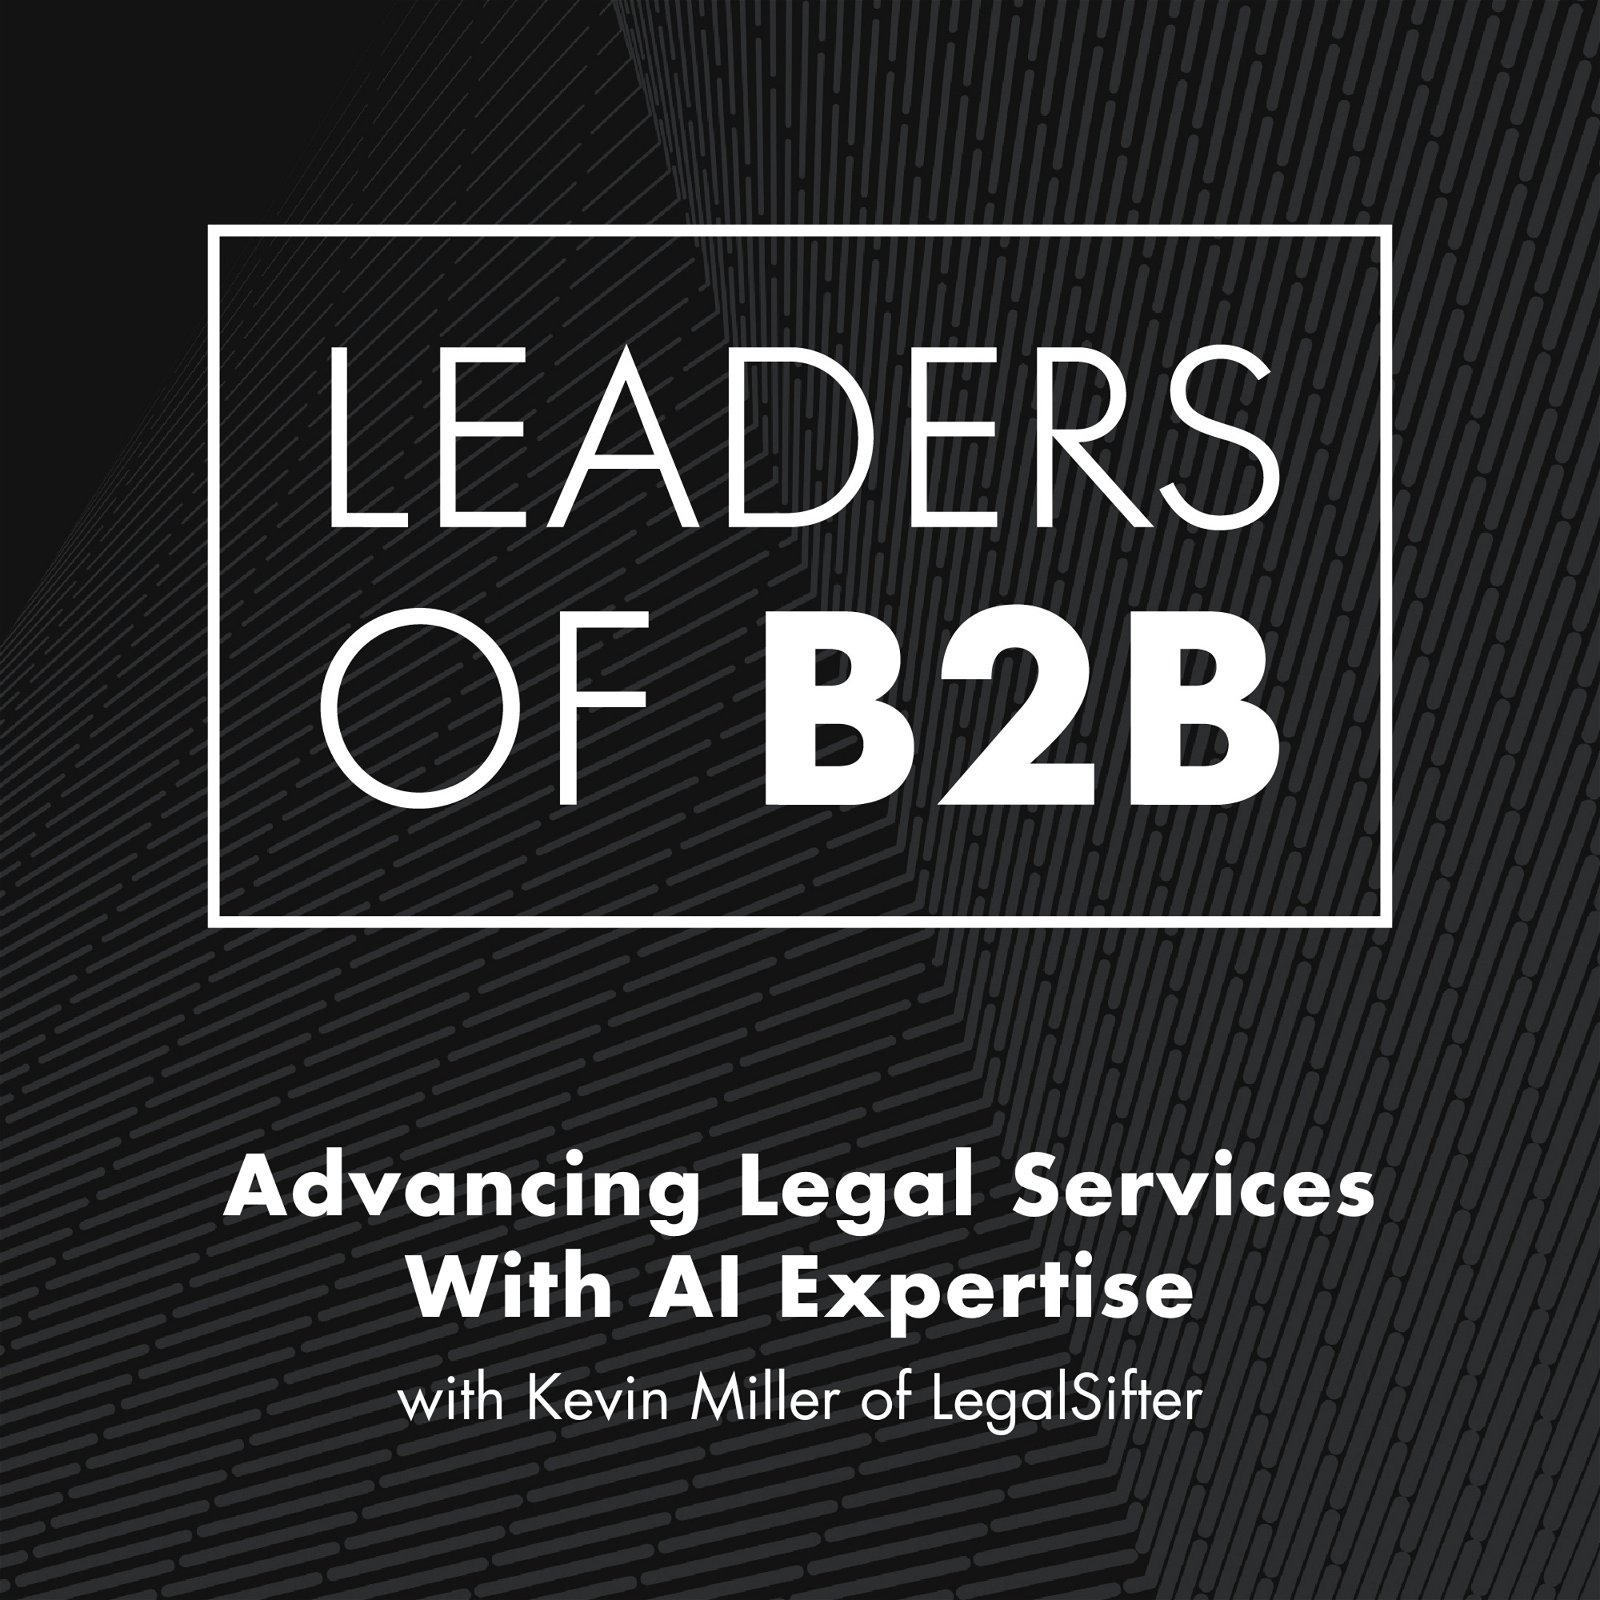 Advancing Legal Services With AI Expertise with Kevin Miller of LegalSifter